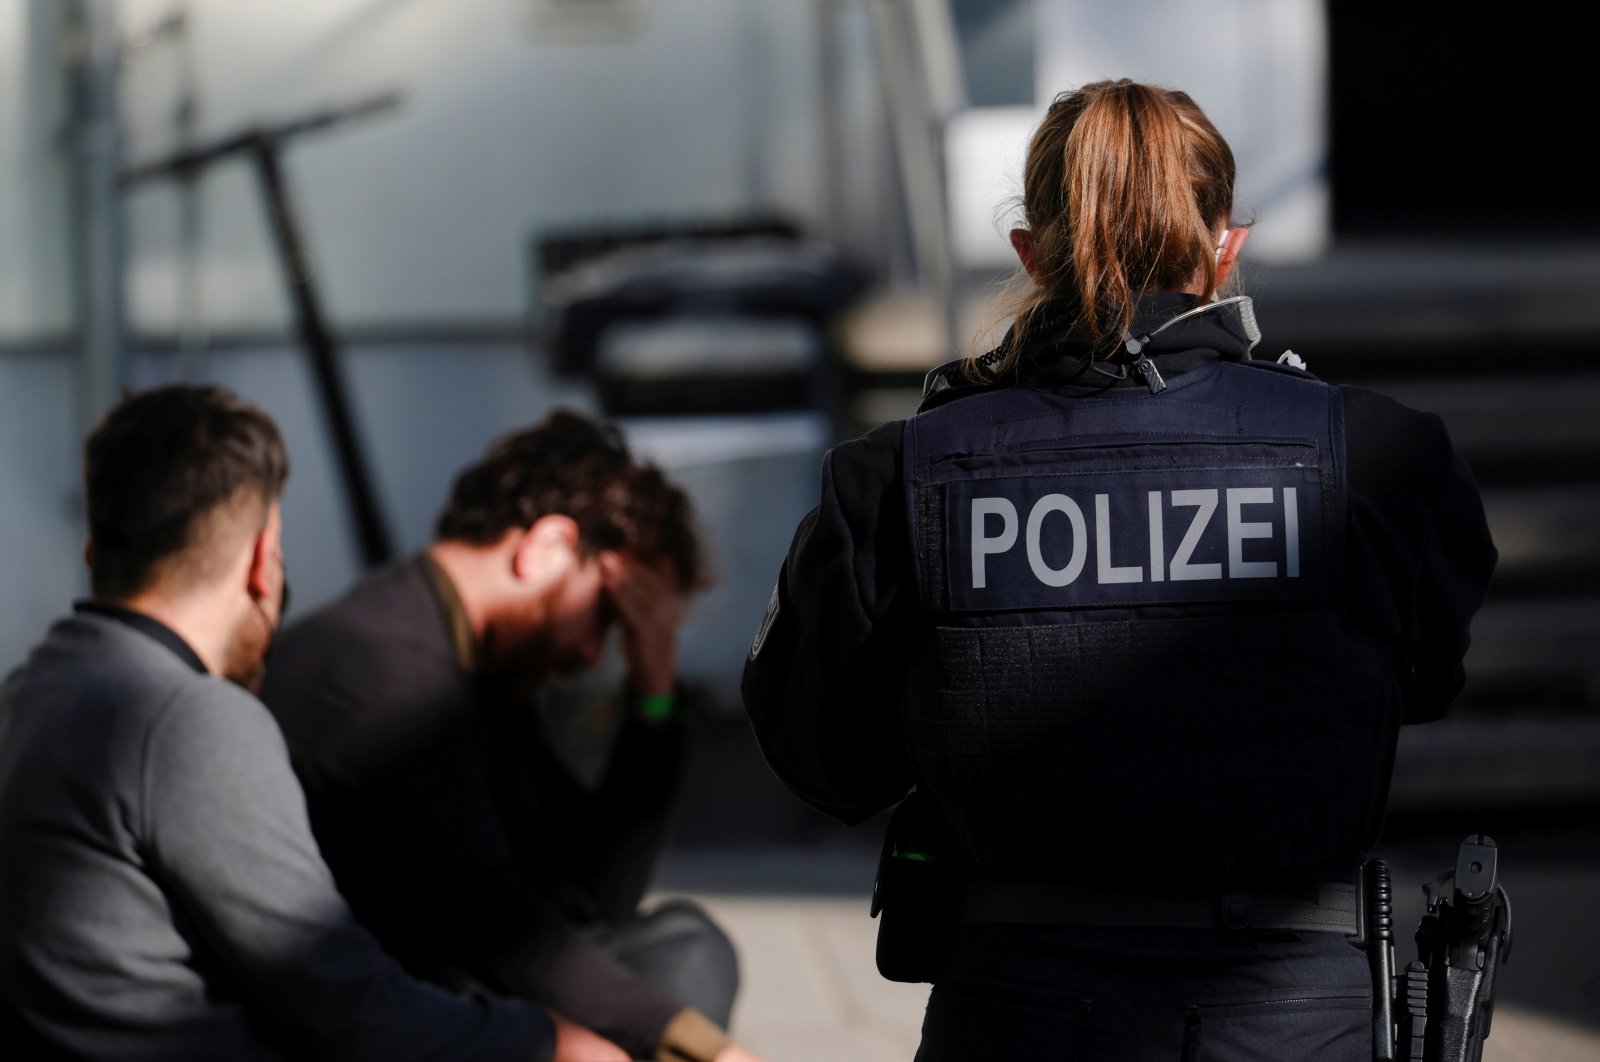 German police officers detain two migrants, reportedly coming from Iraq through Belarus and Poland, during a patrol near the German-Polish border, in Frankfurt (Oder), Germany, Oct. 28, 2021. (Reuters File Photo)